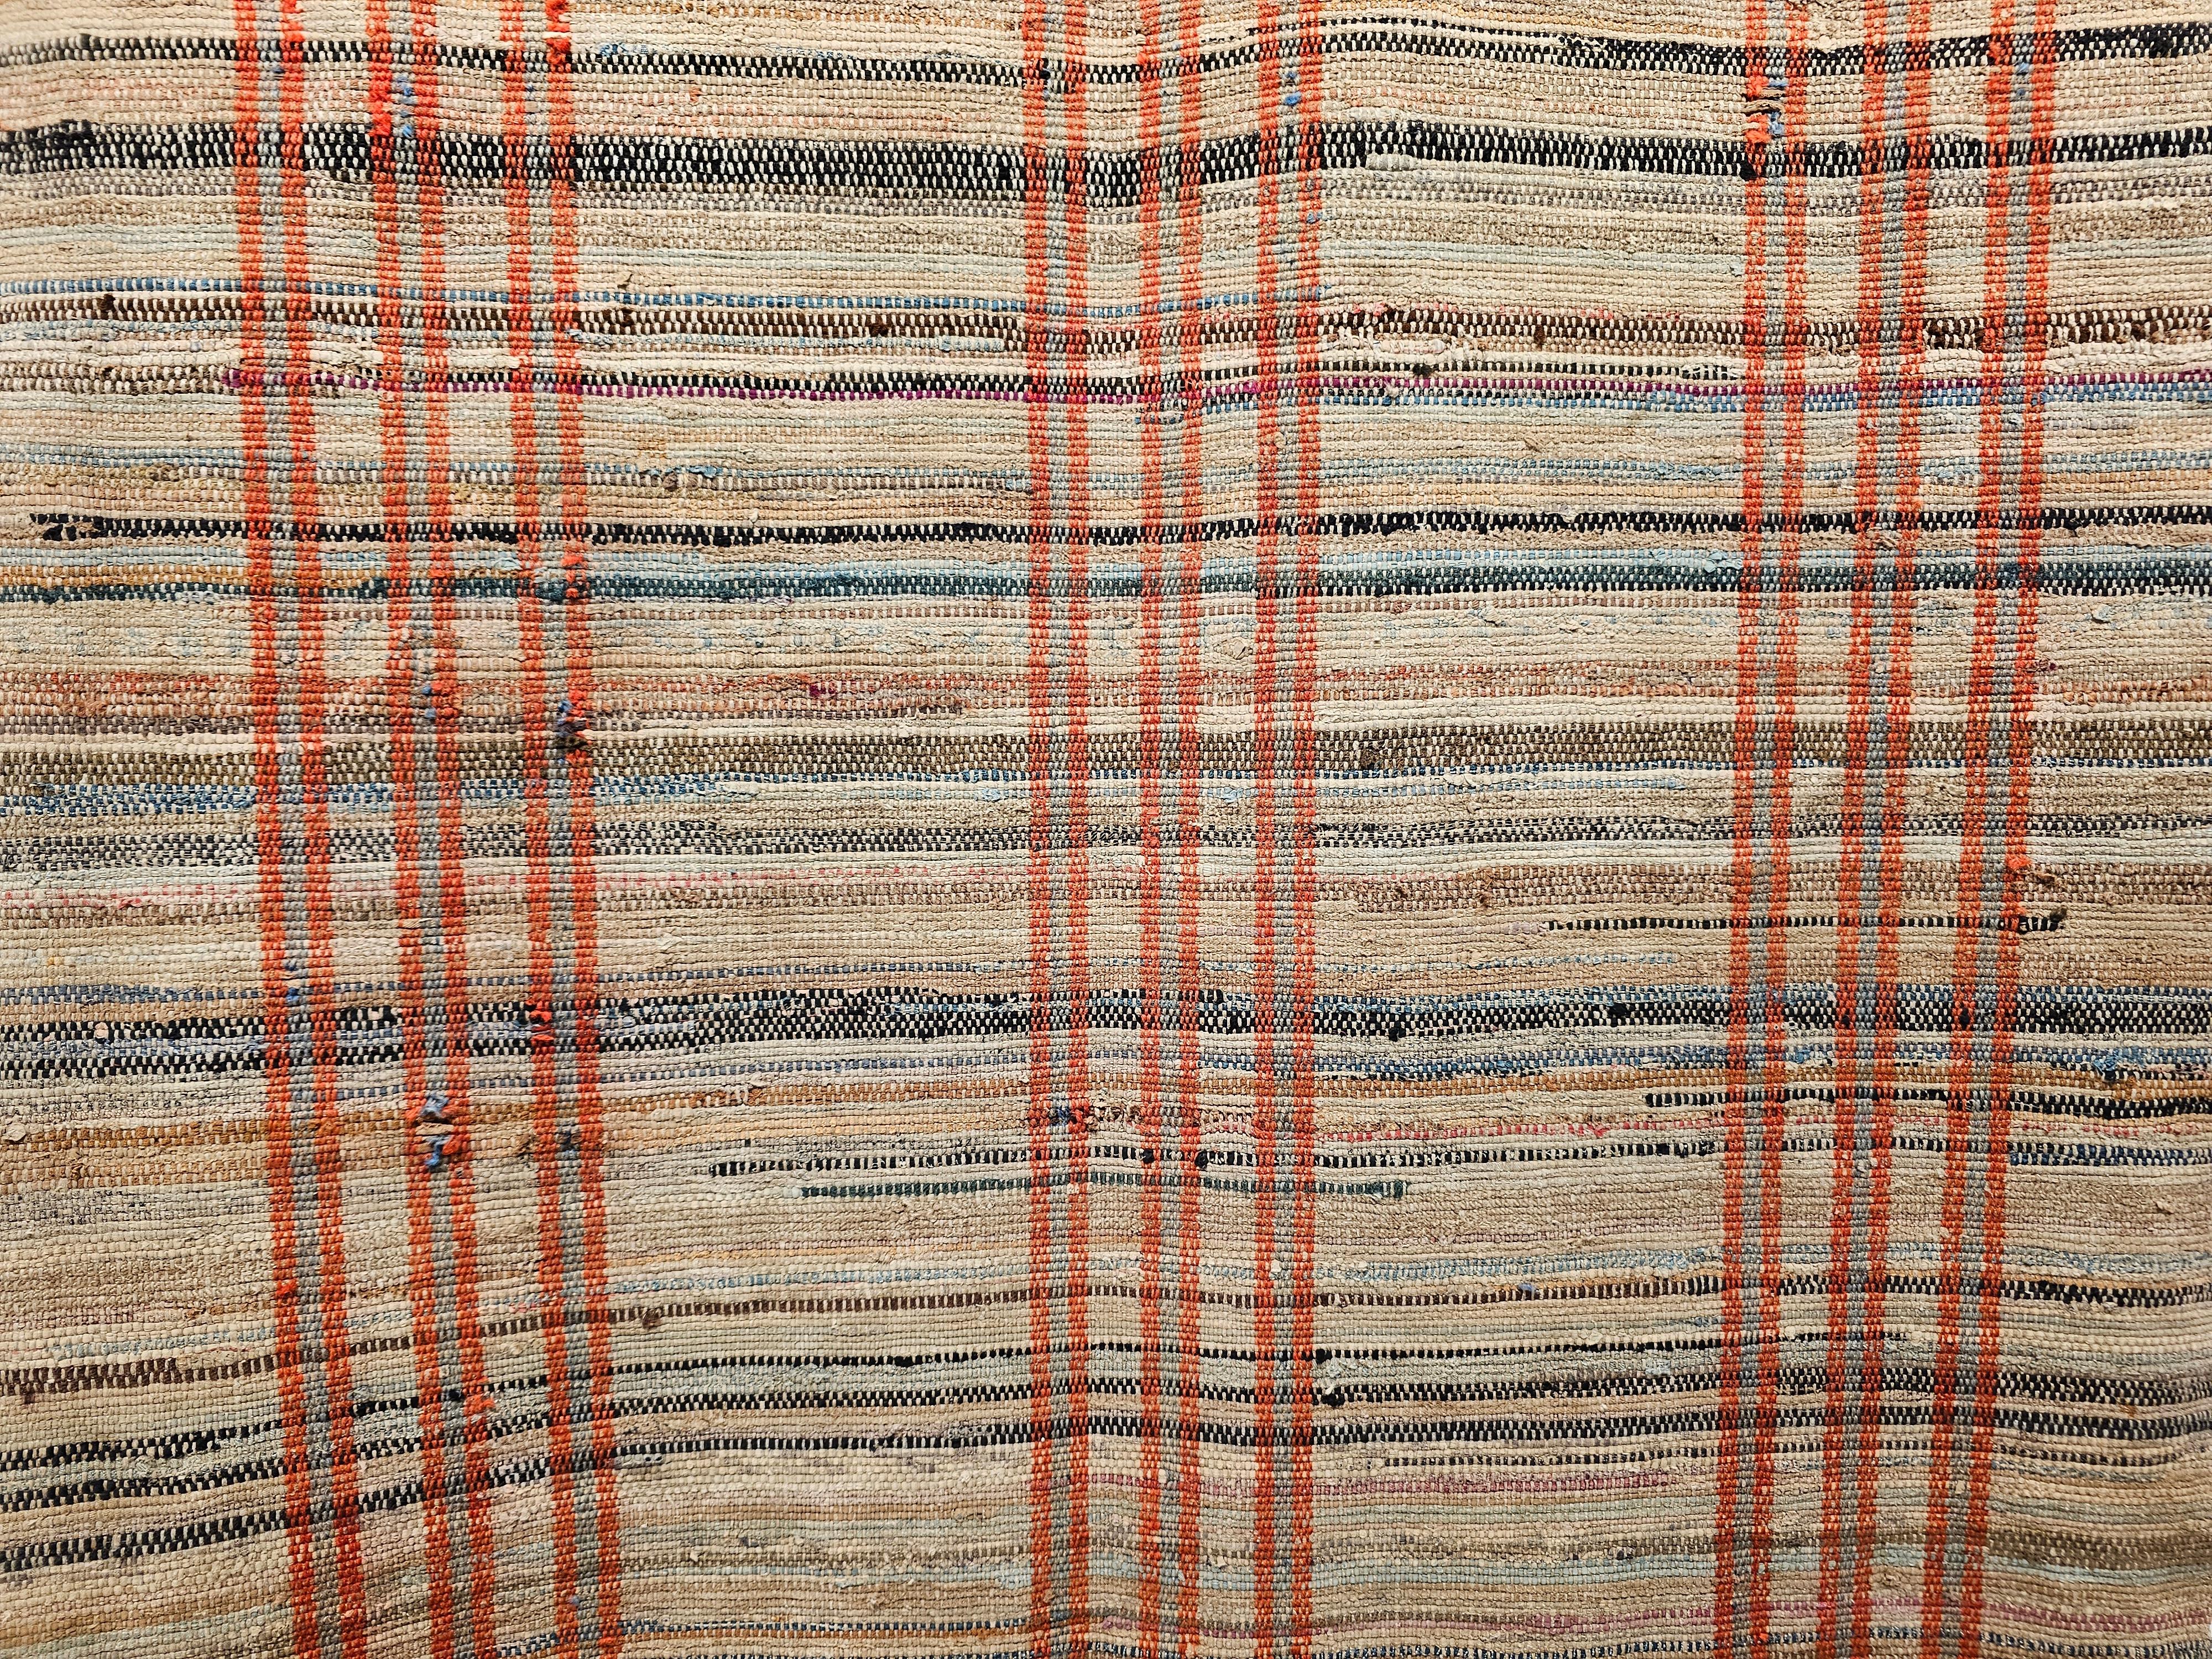 Hand-Woven Vintage American Rag Runner in Tan with Stripe Pattern in Red, Pale Blue For Sale